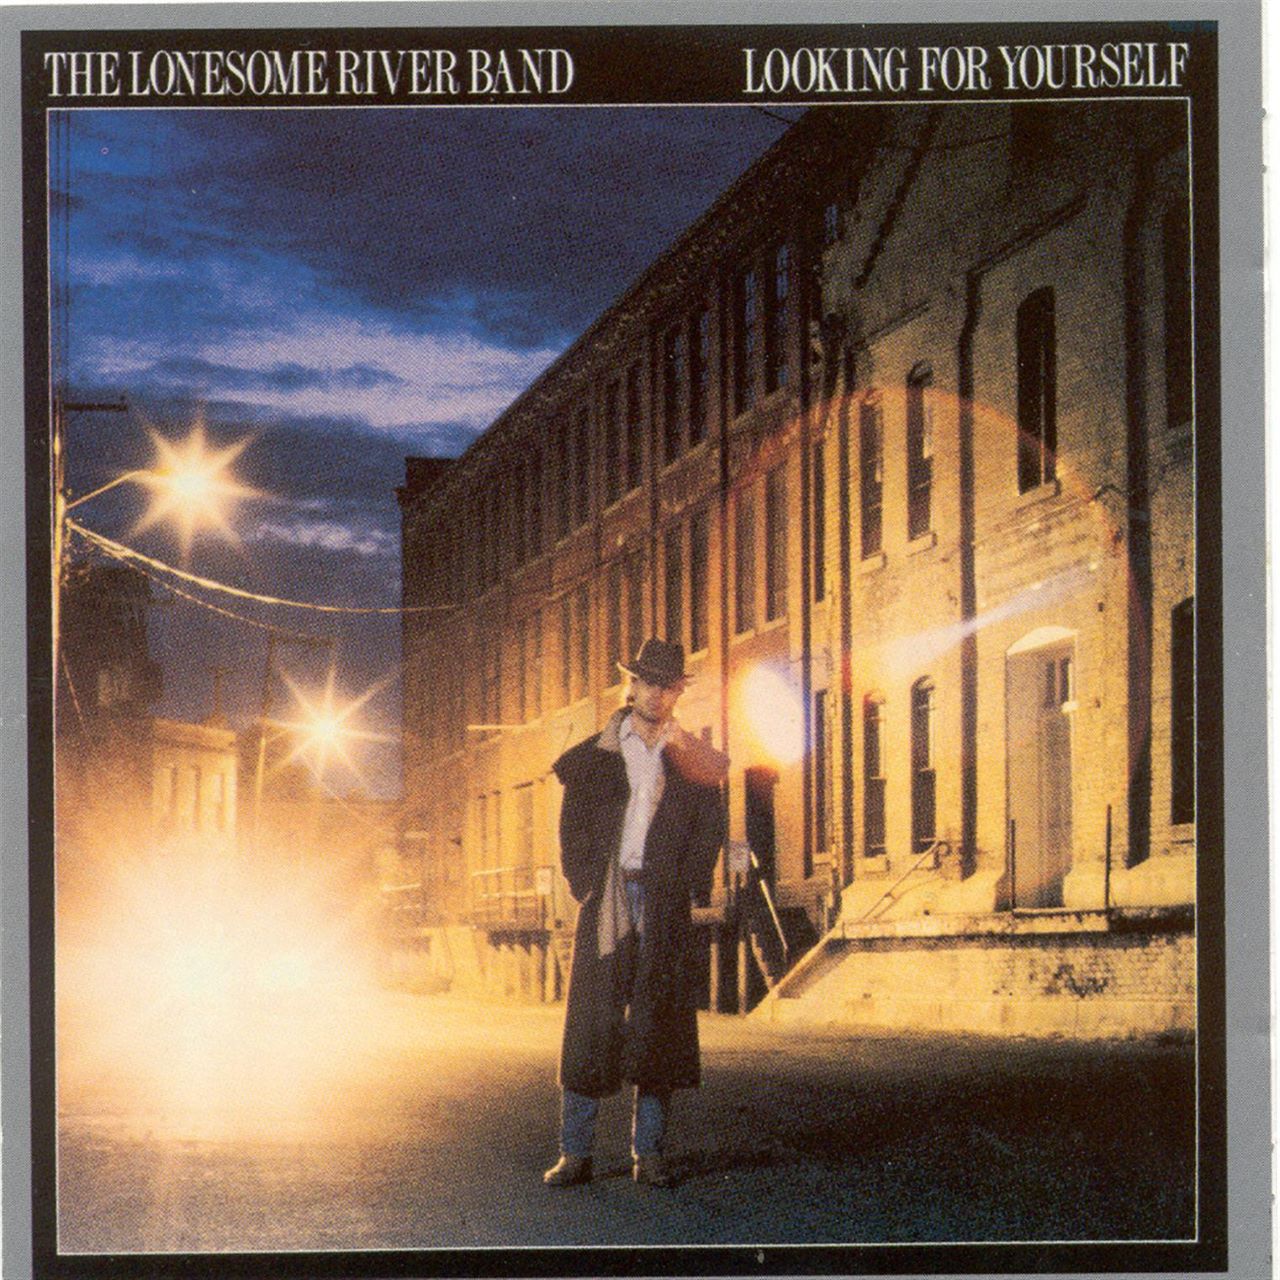 Lonesome River Band - Looking For Yourself cover album